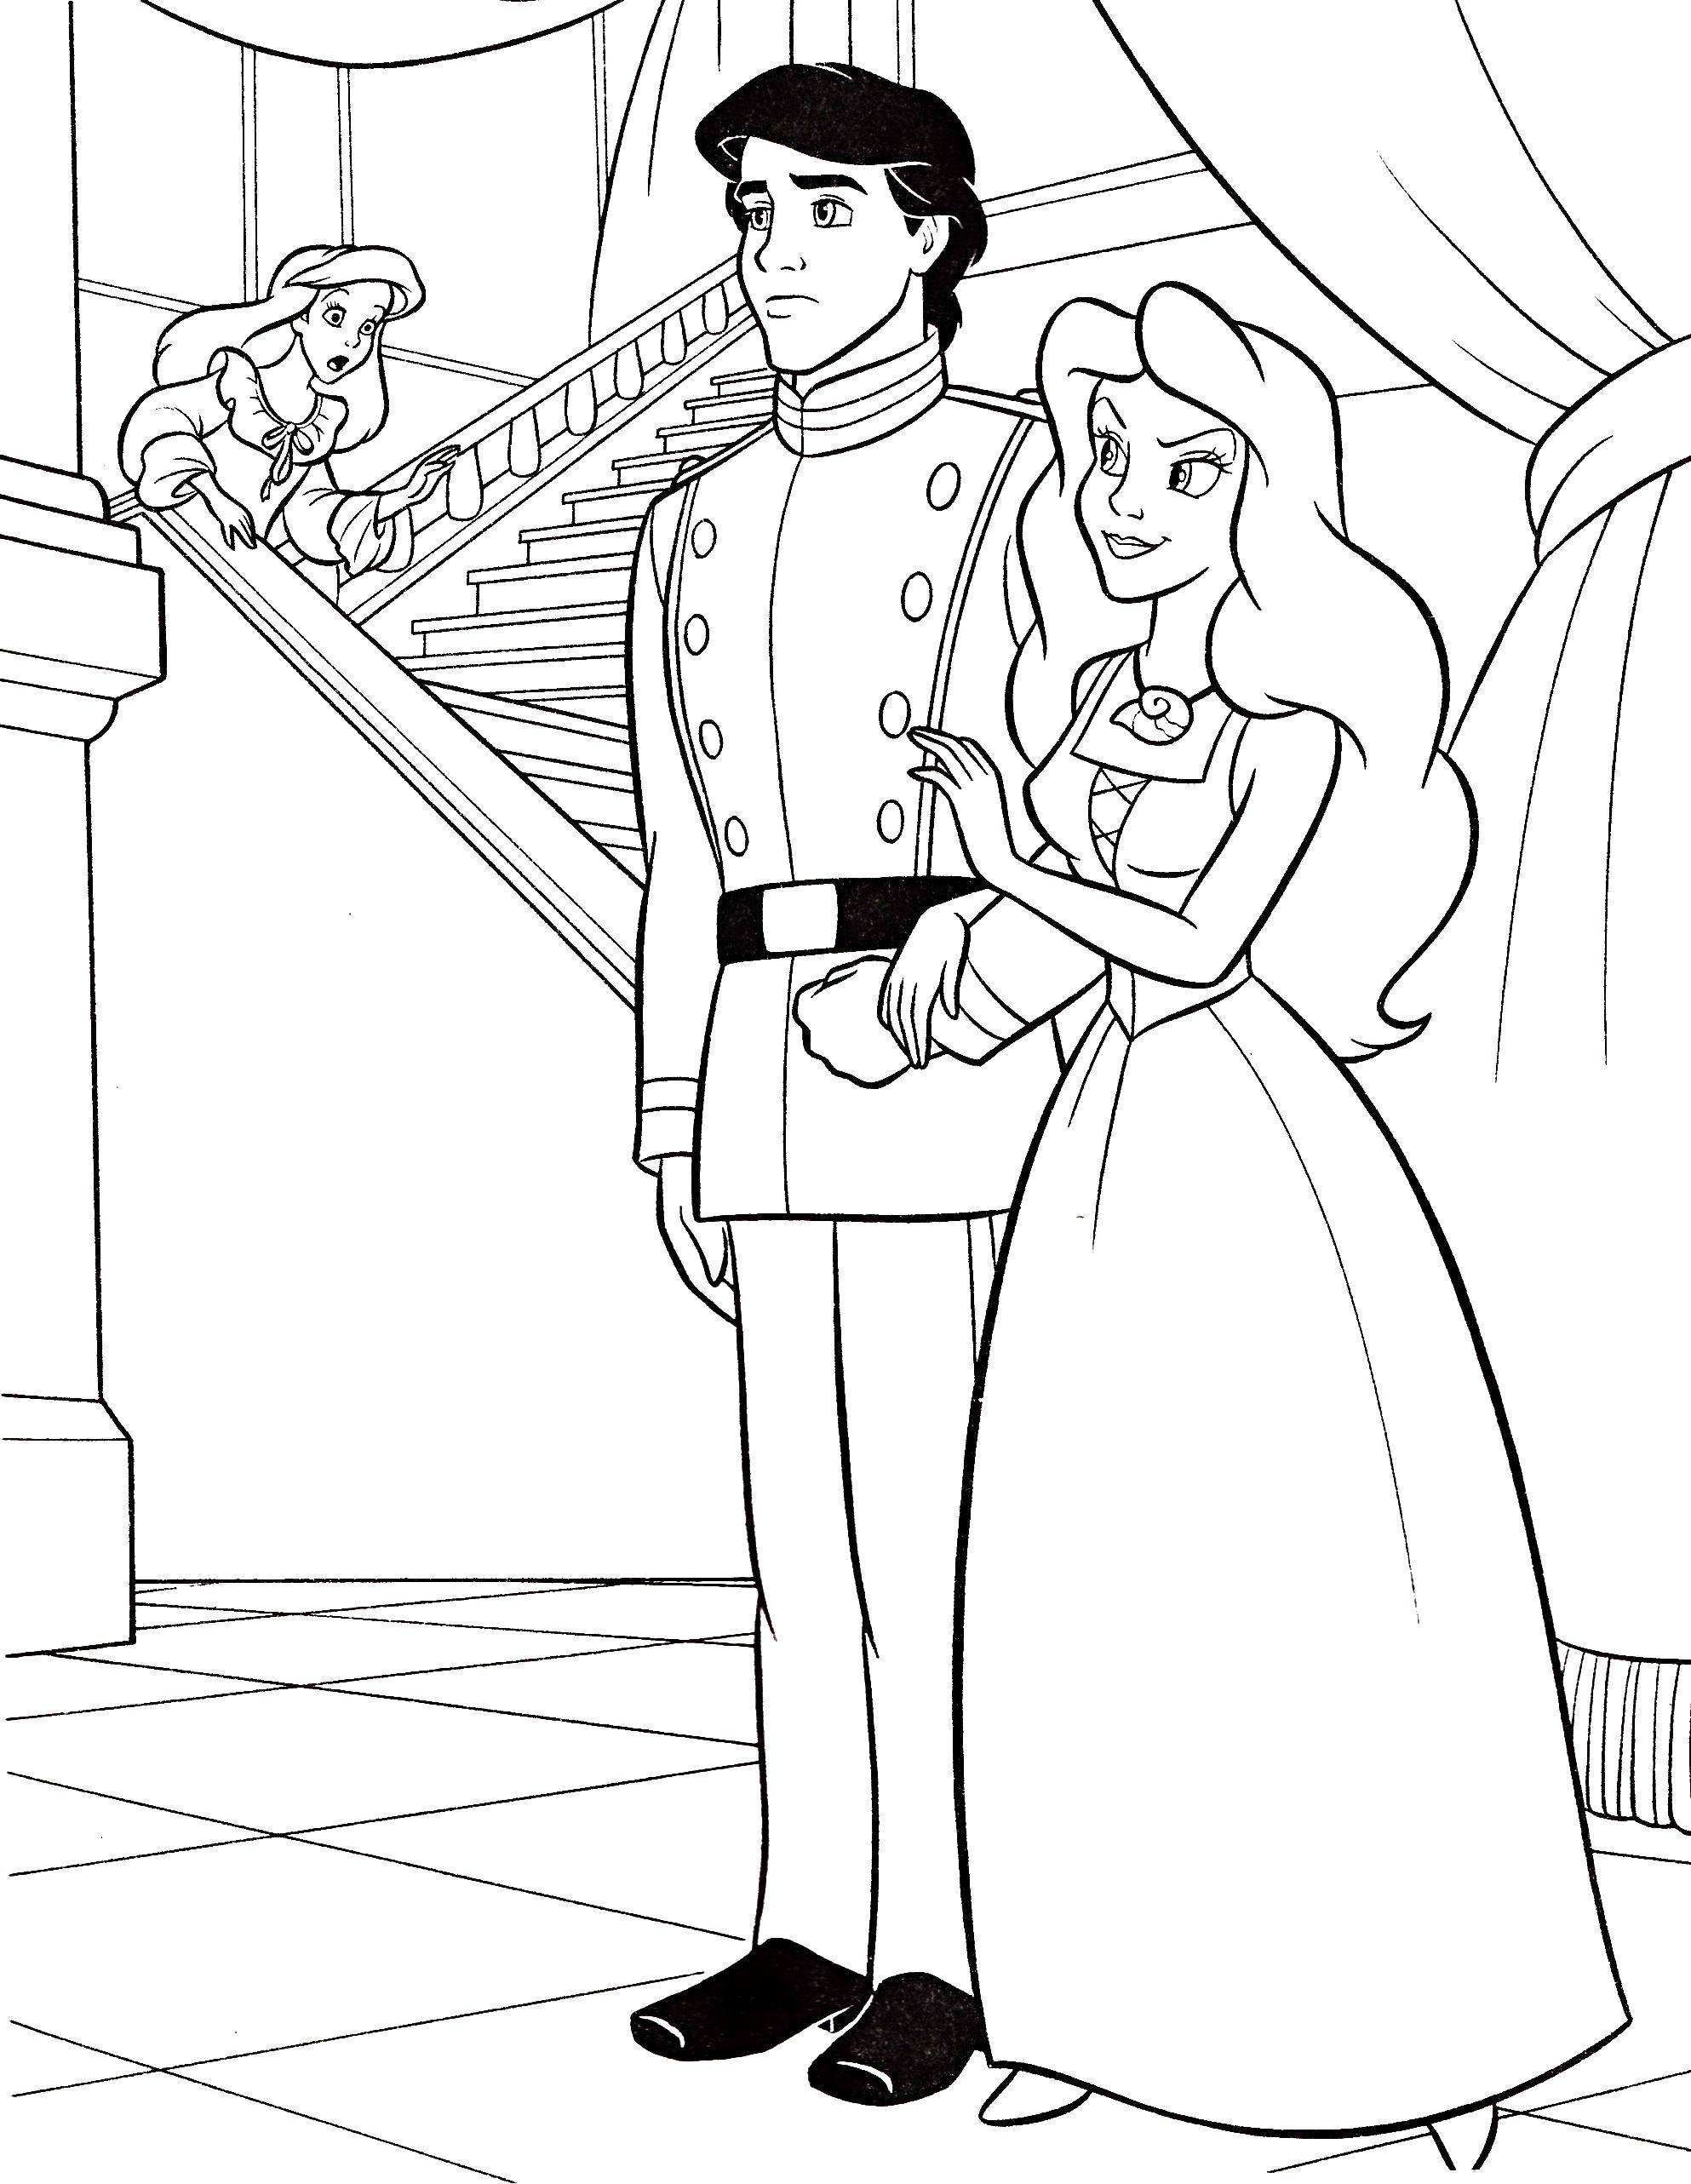 Coloring Ariel runs to Prince Eric. Category the little mermaid Ariel. Tags:  Ariel, mermaid, .